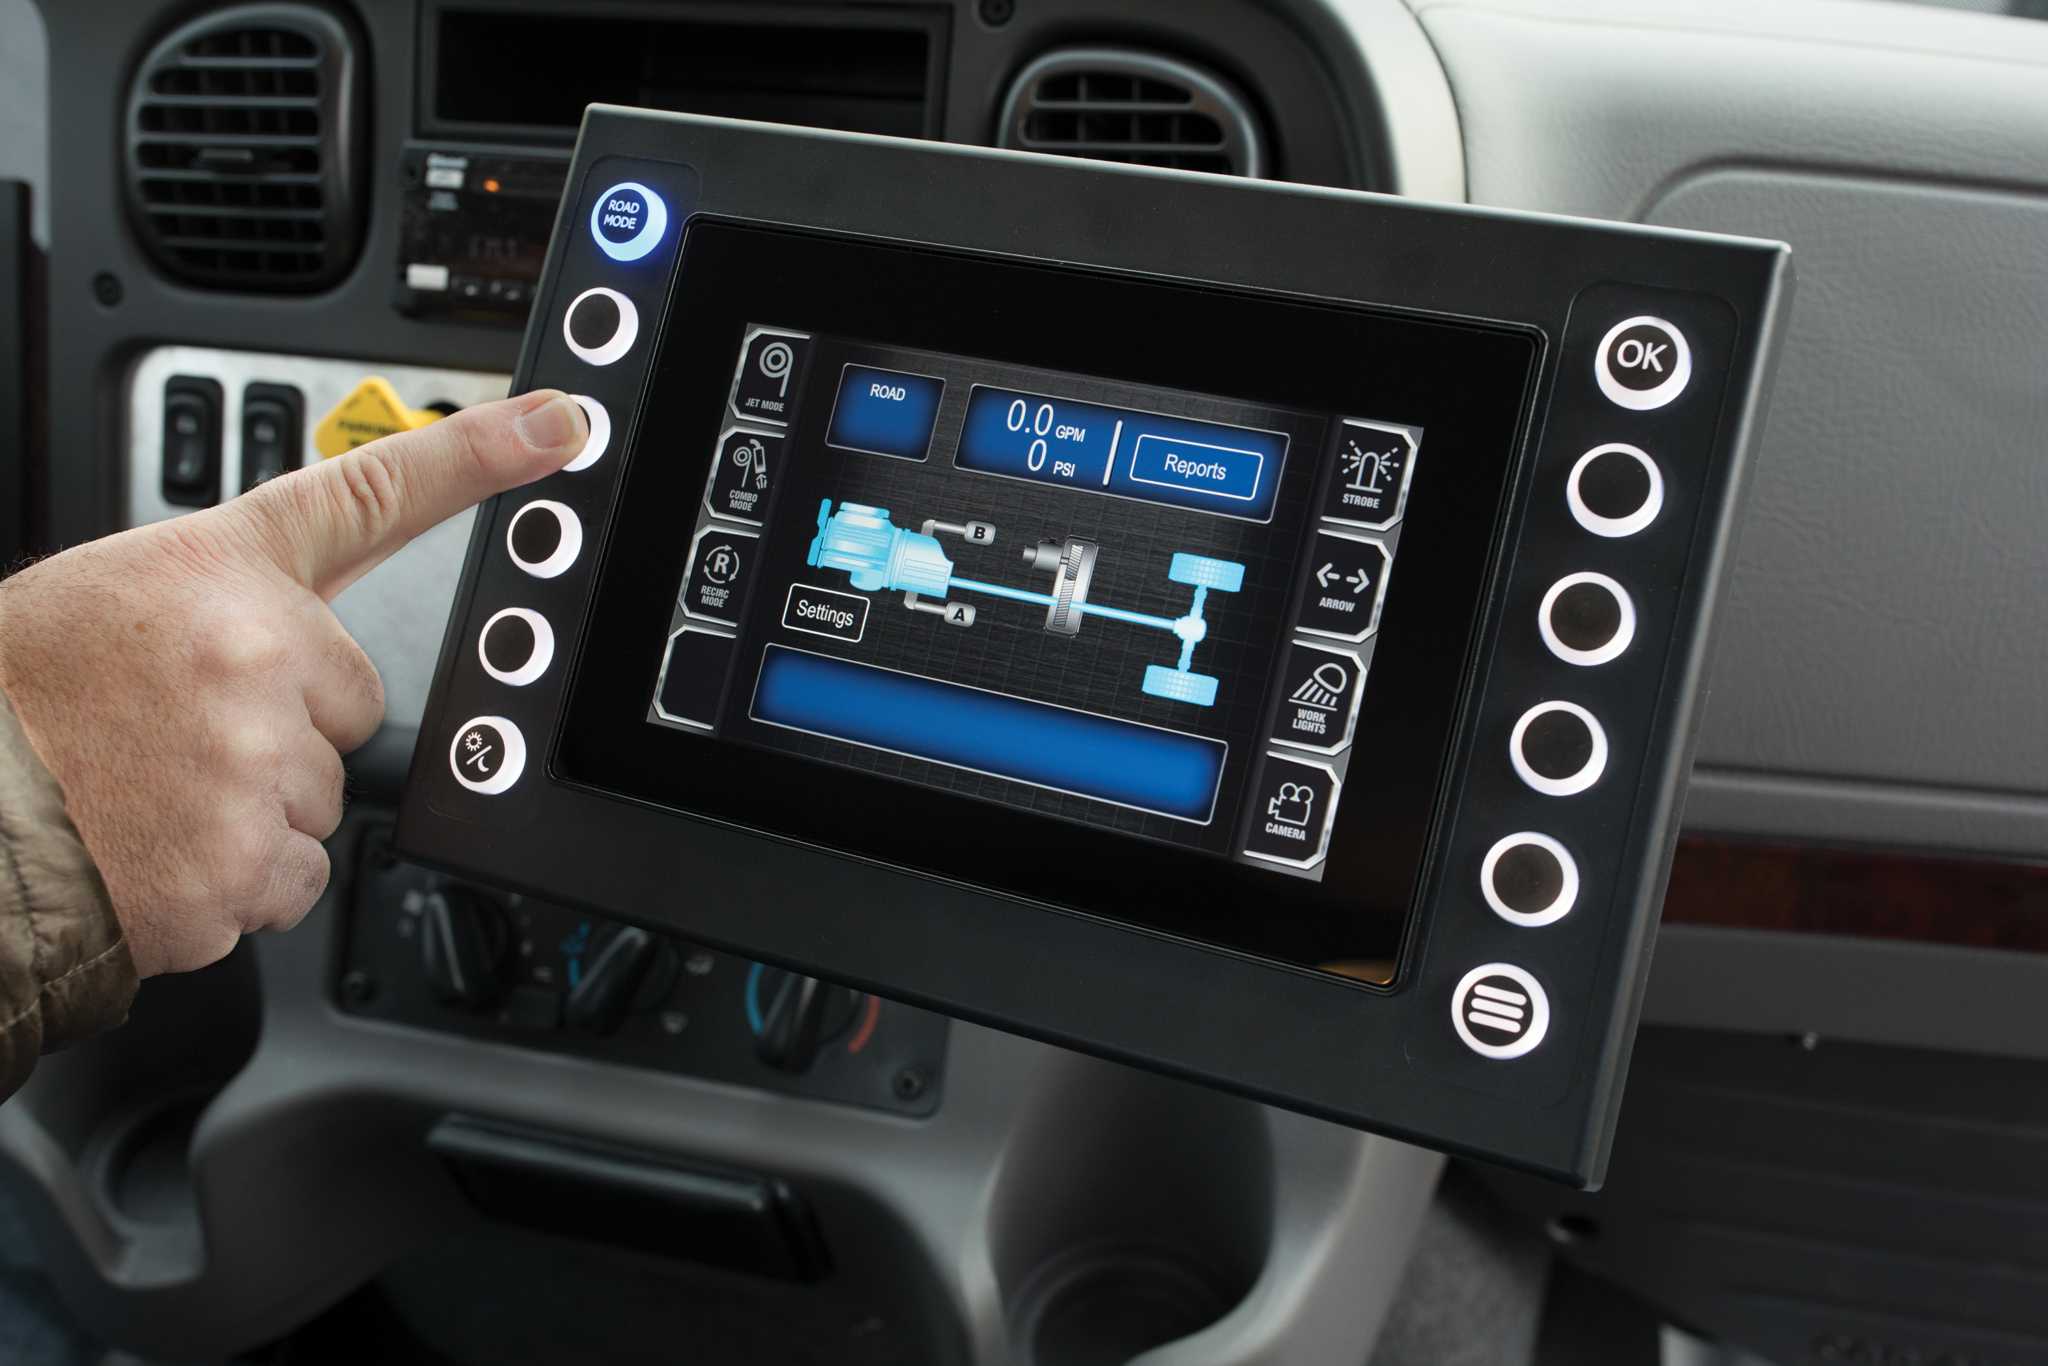 The in-cab controls